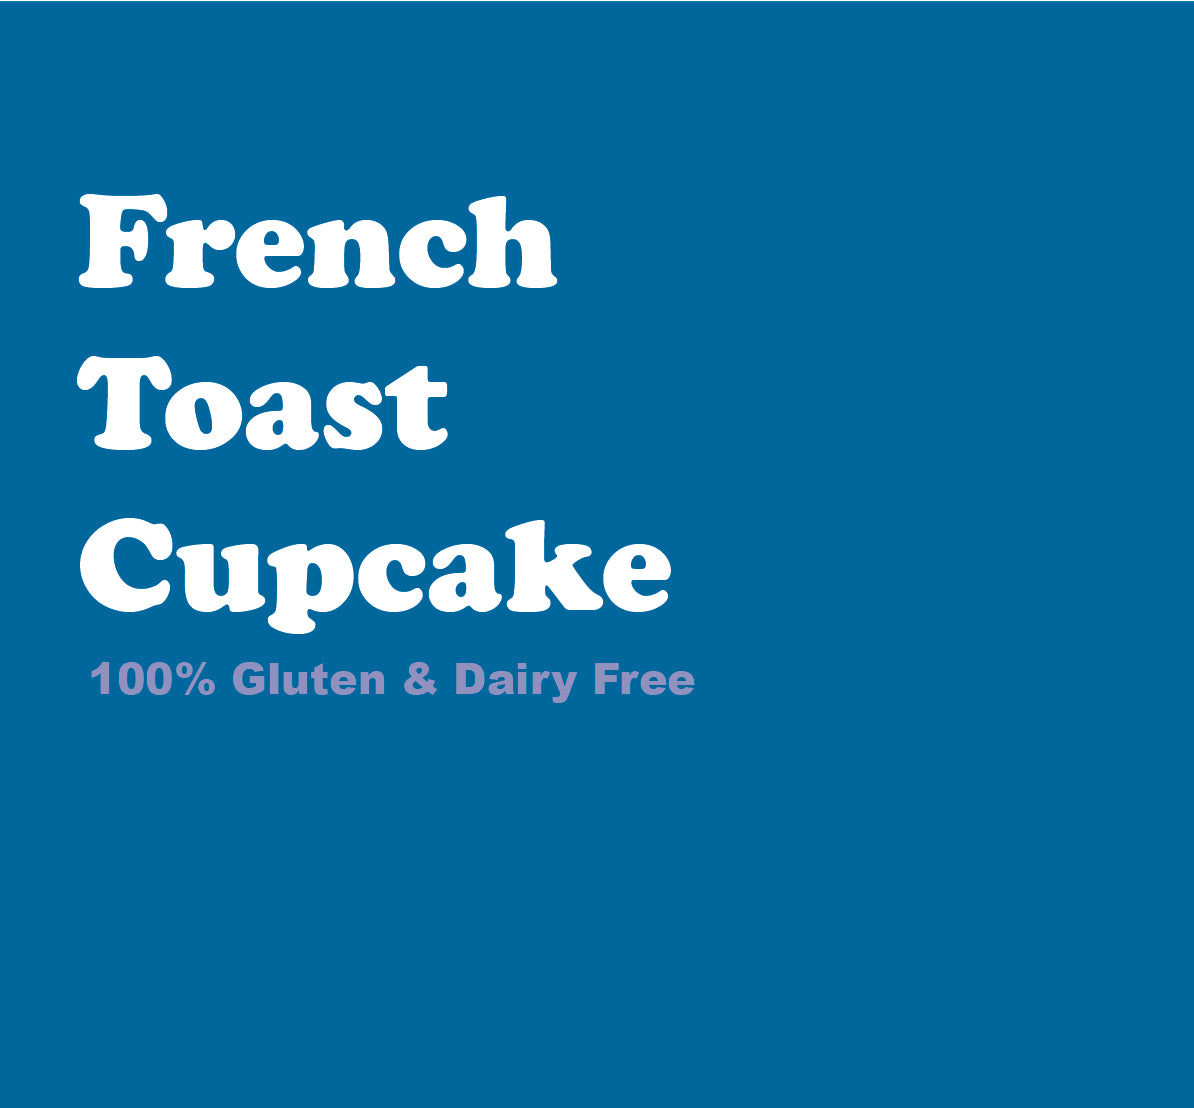 French Toast Cupcakes (4 PACK)